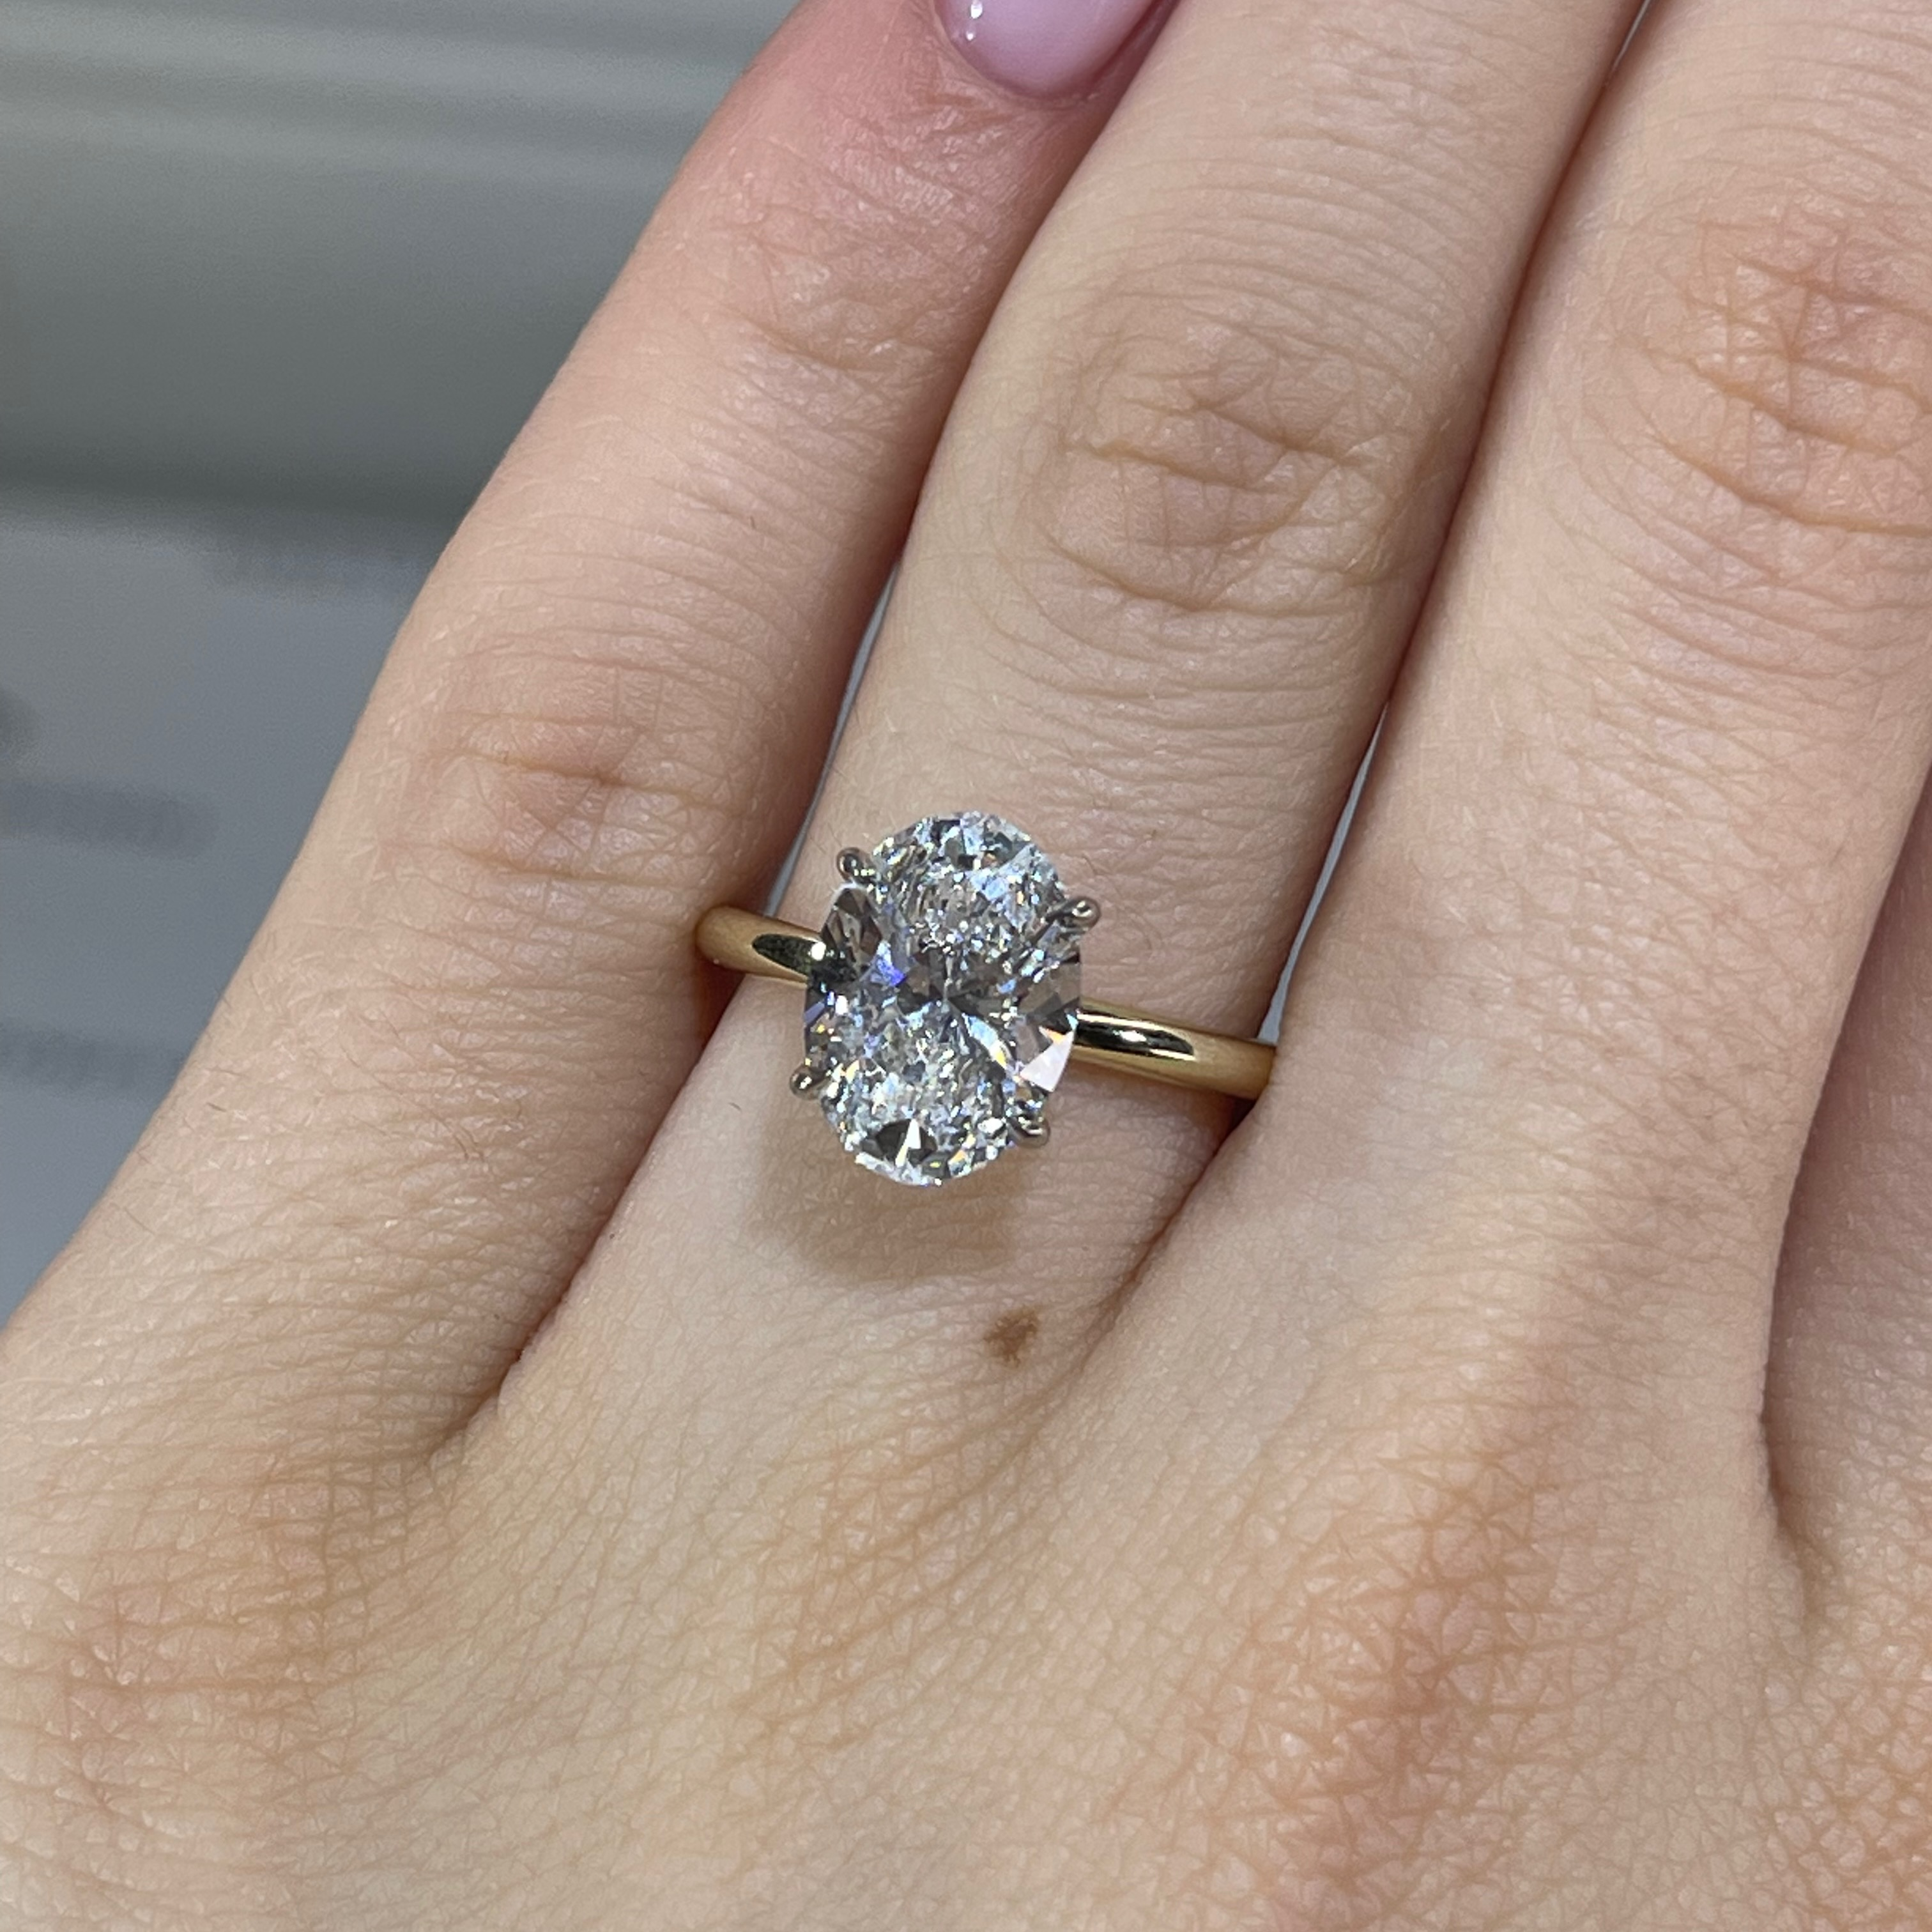 7 Tips For Choosing The Best Engagement Rings For Active Women